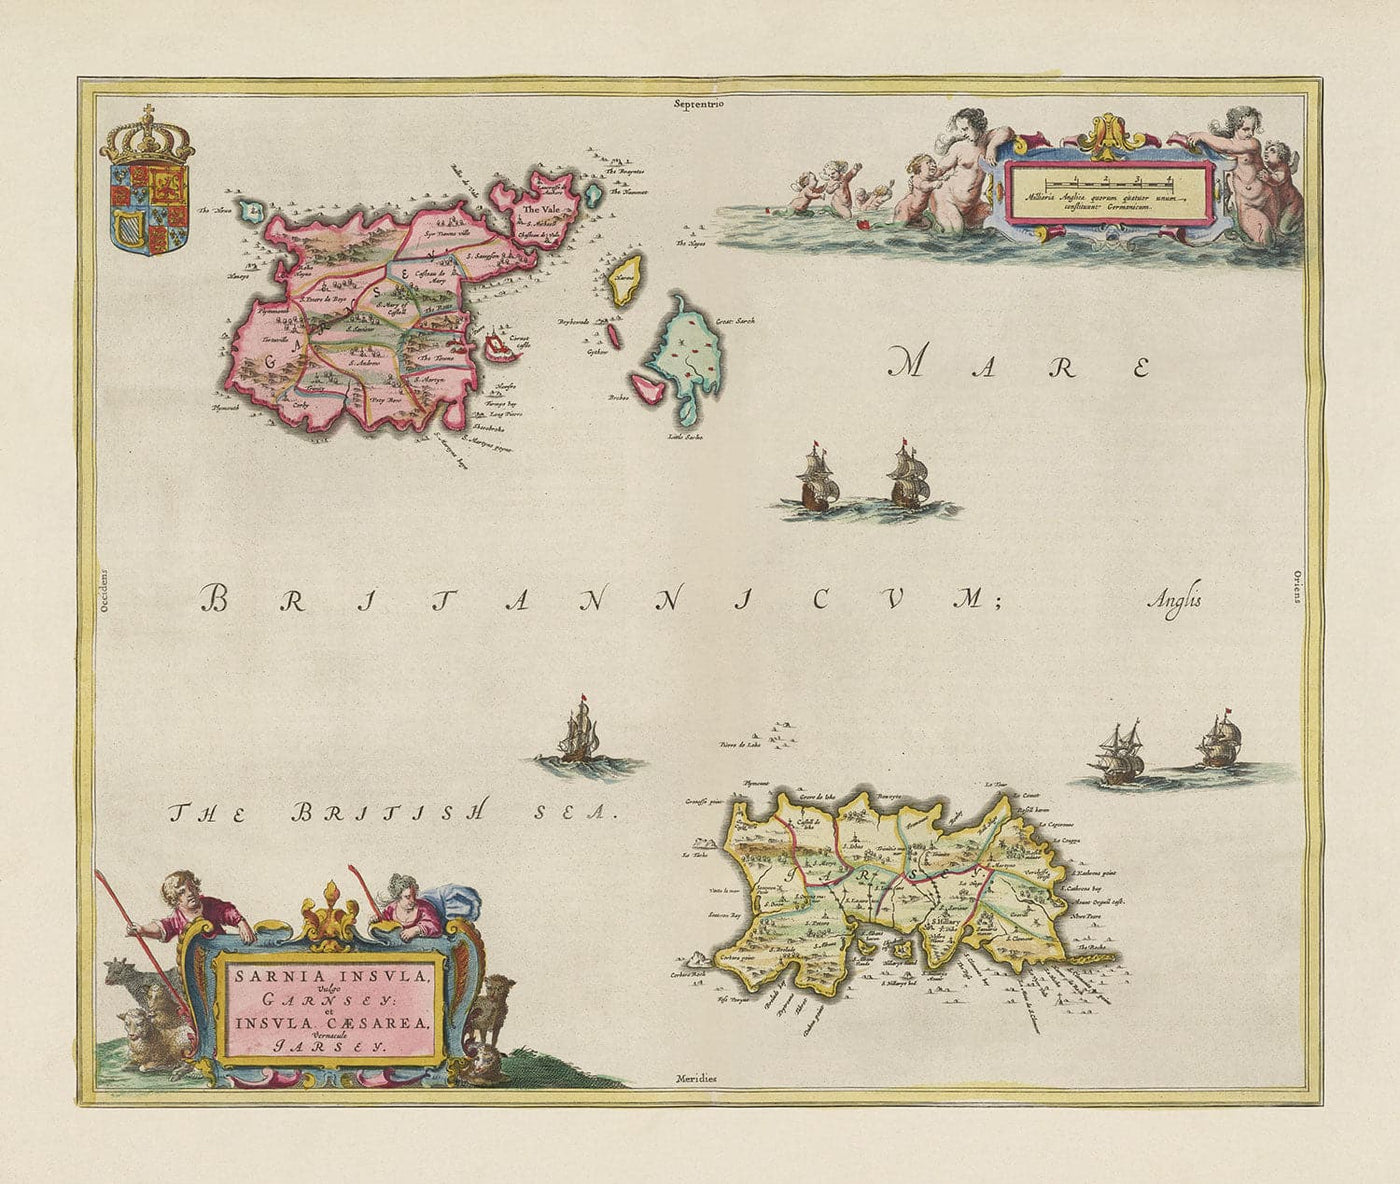 Old Map of Jersey and Guernsey, 1665 by Blaeu - English Channel Isles, Bailiwicks and Crown Dependencies, St Helier, Saint Peter Port